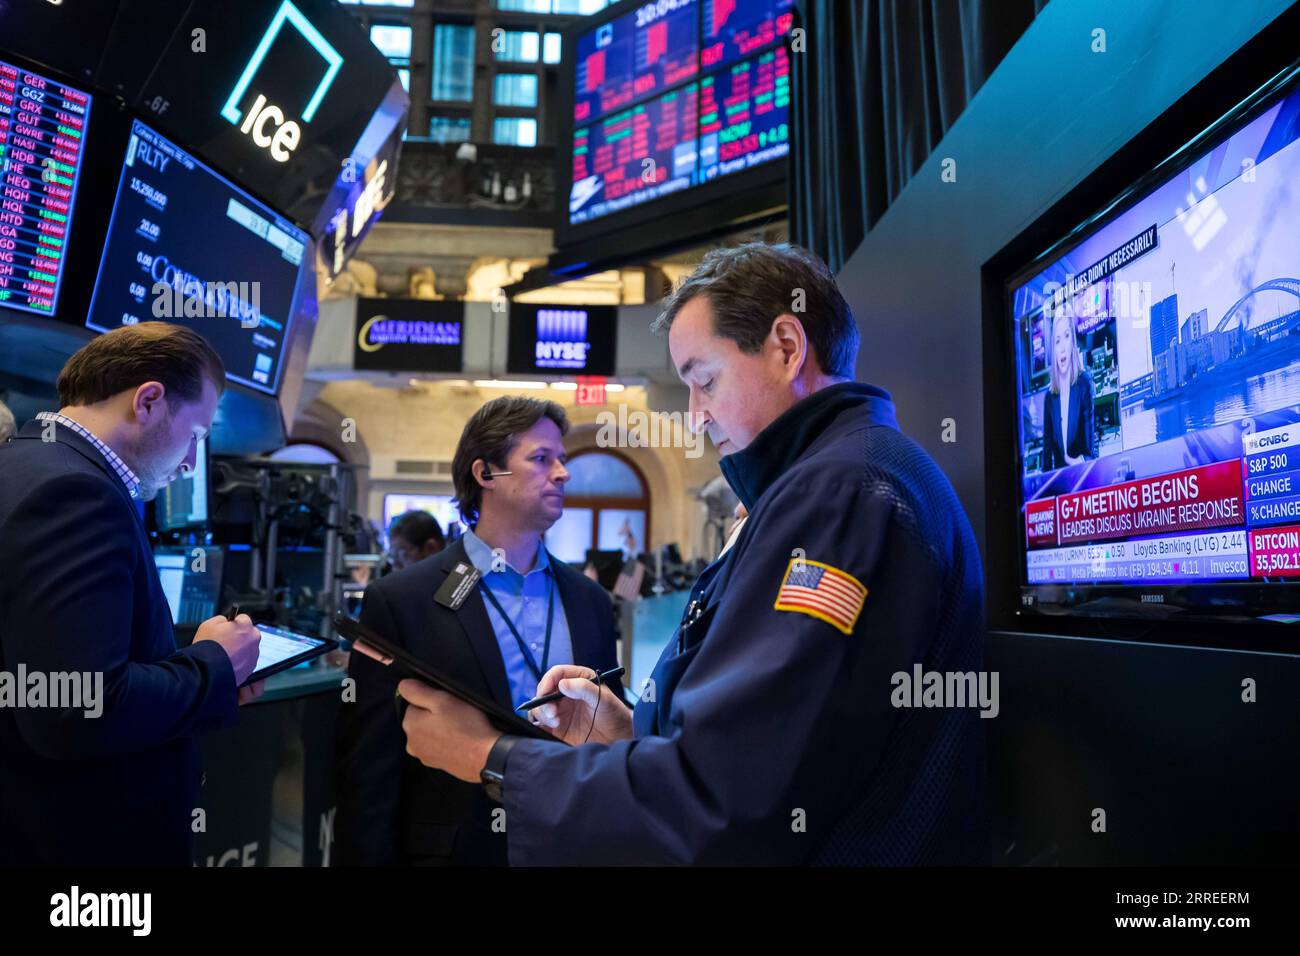 220224 -- NEW YORK, Feb. 24, 2022 -- Traders work at the New York Stock Exchange in New York, the United States, Feb. 24, 2022. U.S. stocks finished higher on Thursday, reversing the massive losses earlier in the session, as investors assessed the geopolitical tensions over Ukraine. The Dow Jones Industrial Average rose 92.07 points, or 0.28 percent, to 33,223.83. The S&P 500 climbed 63.20 points, or 1.50 percent, to 4,288.70. The Nasdaq Composite Index increased 436.09 points, or 3.34 percent, to 13,473.58. Earlier in the day, all the three major indexes fell sharply with the Dow dropping mor Stock Photo